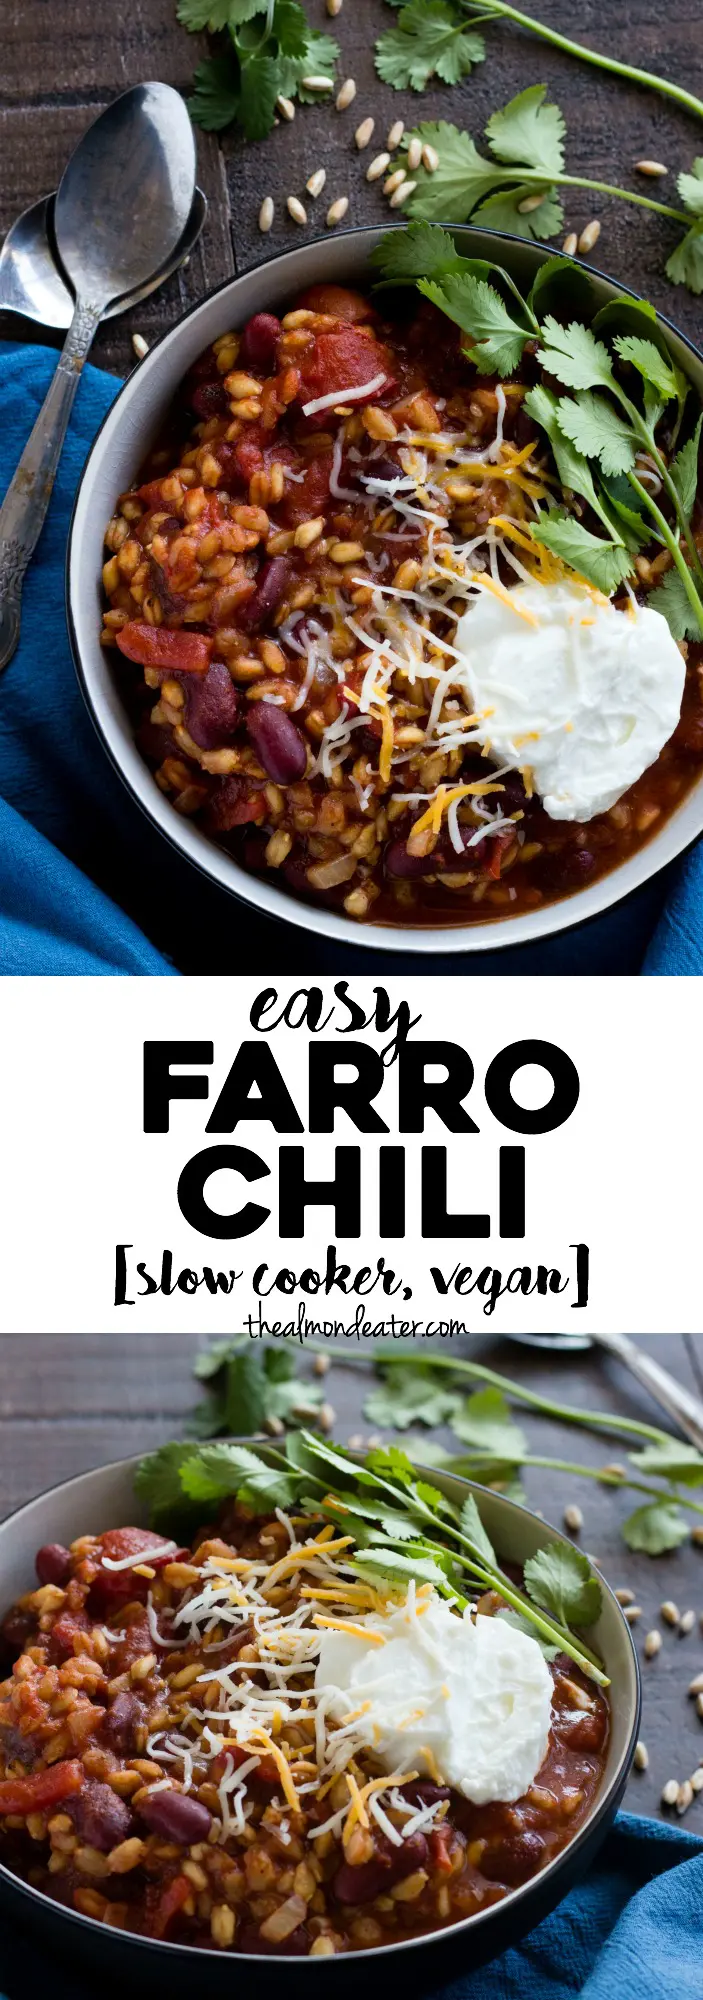 Easy Farro Chili | A chili recipe featuring farro and beans made in your slow cooker! Prep time is less than 5 minutes | thealmondeater.com